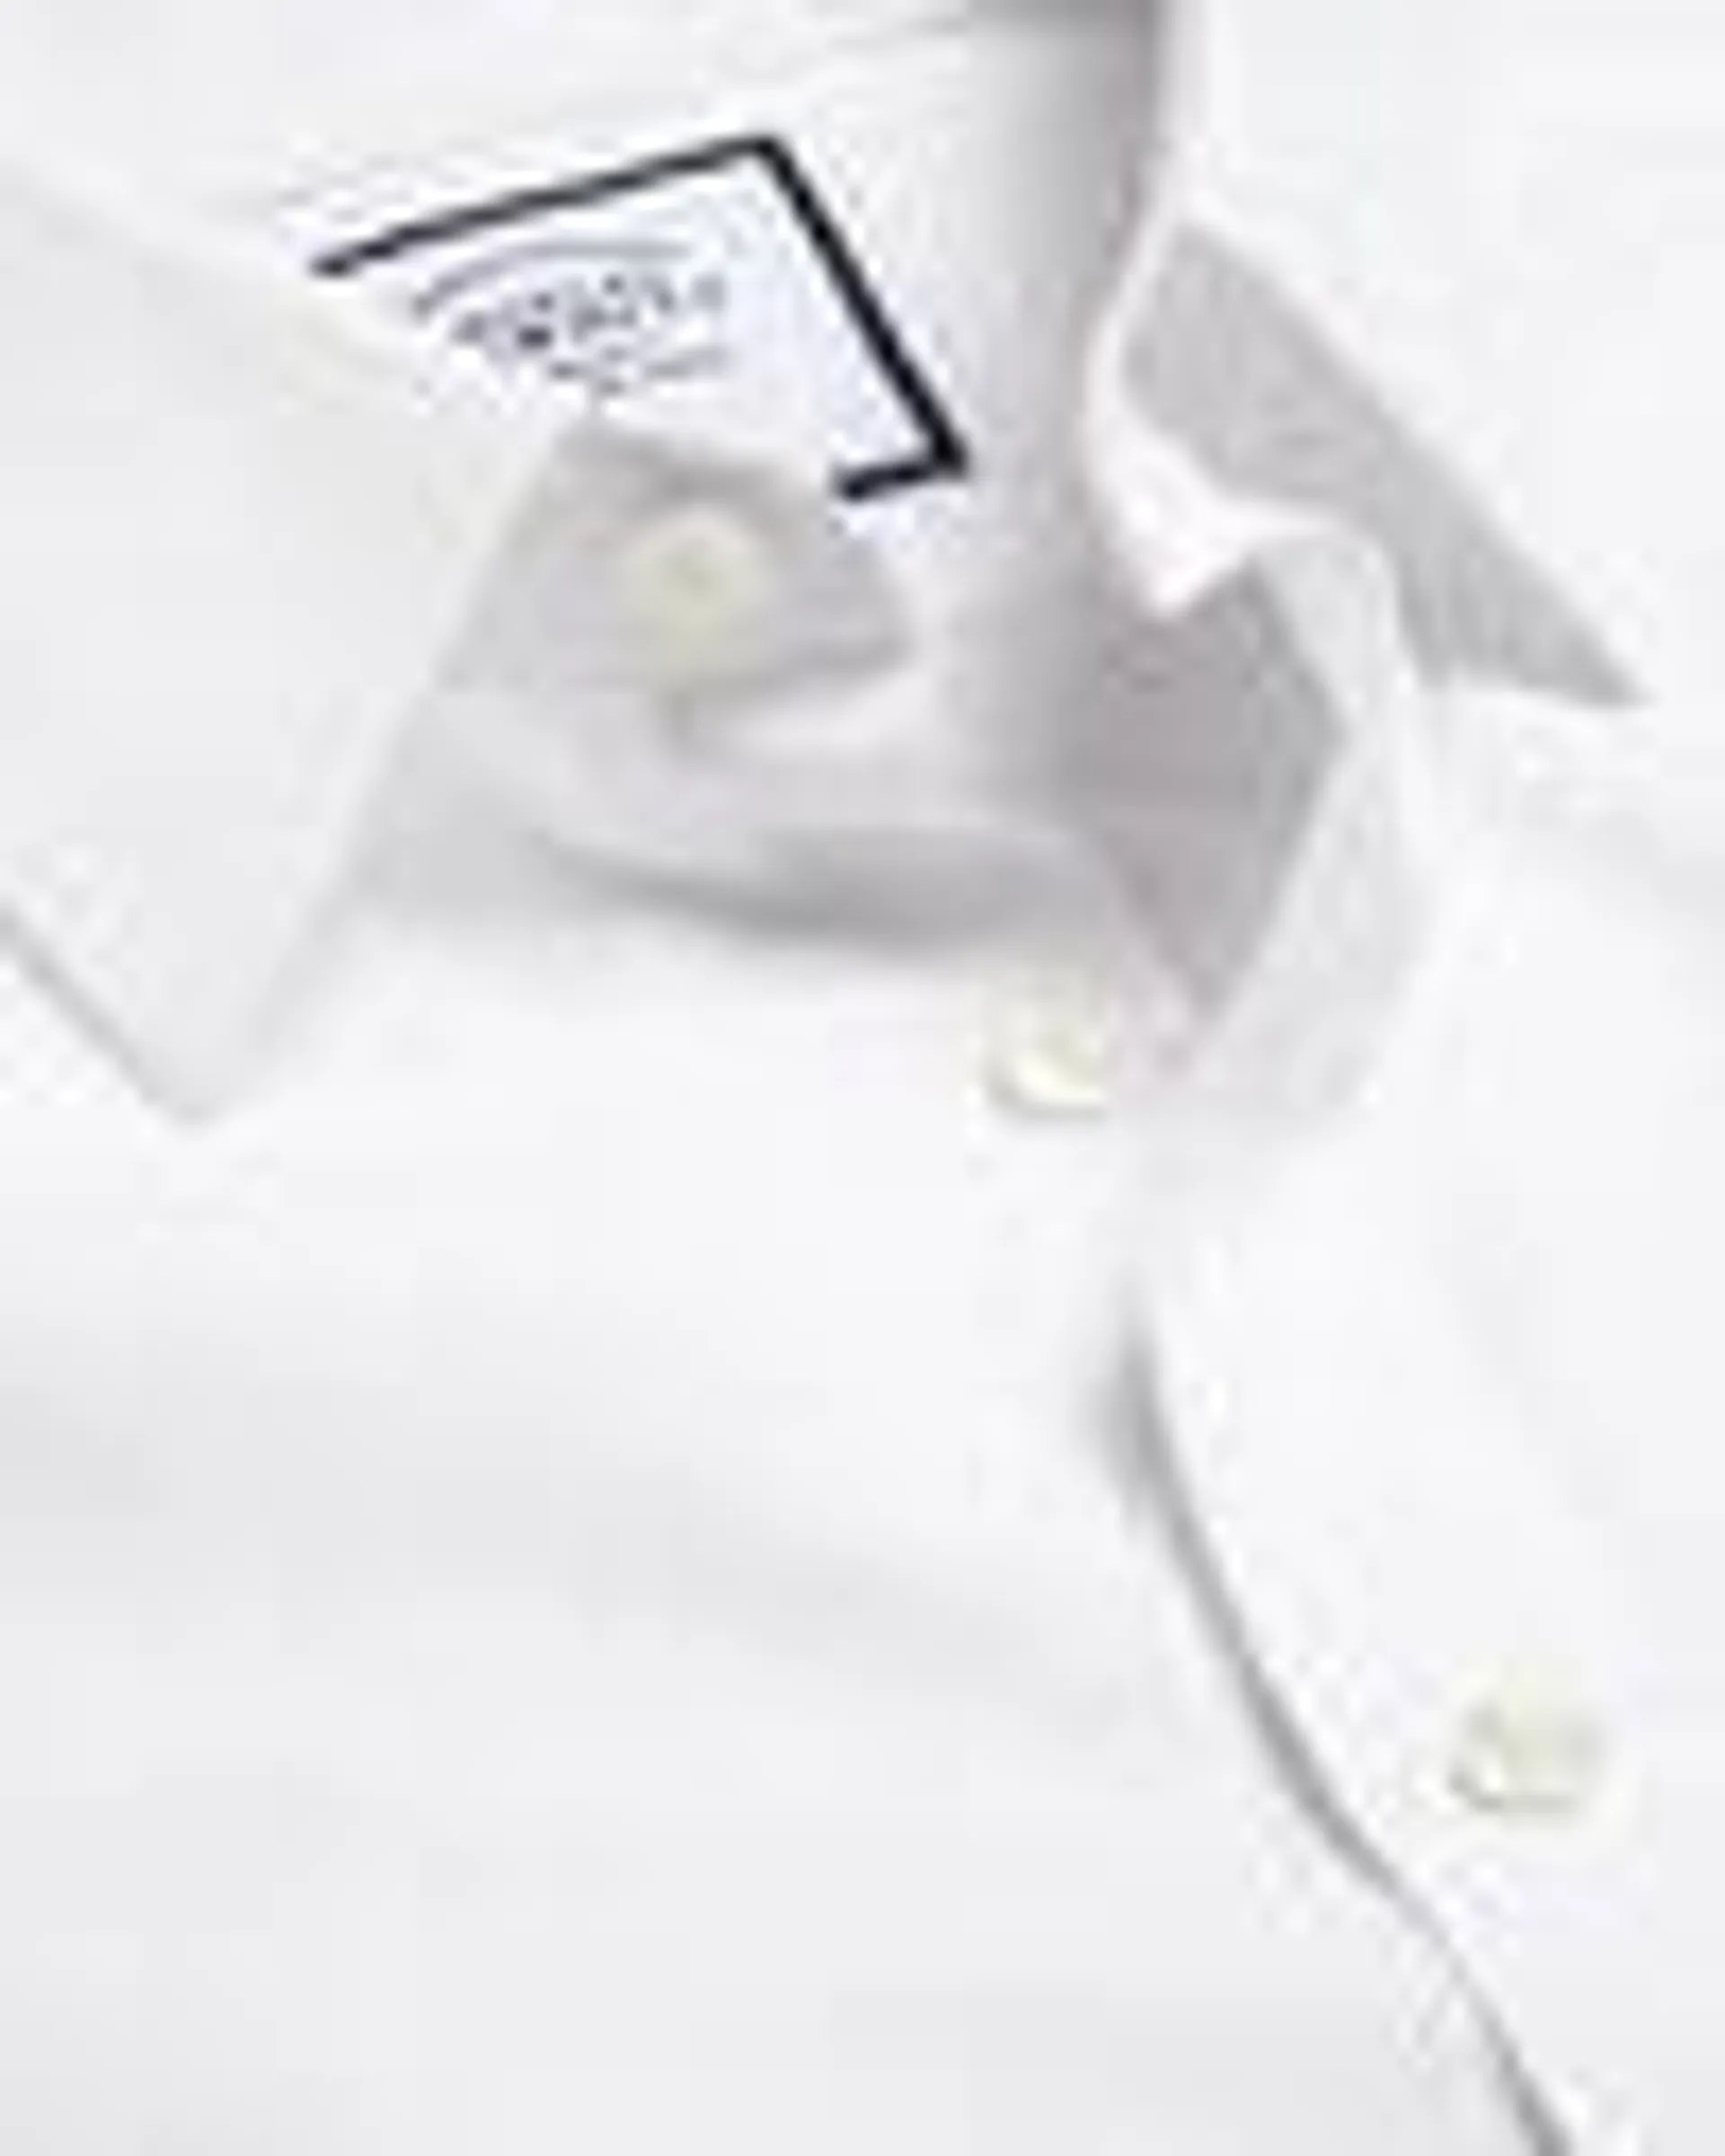 details about product: Non-Iron Poplin Short-Sleeve Shirt - White